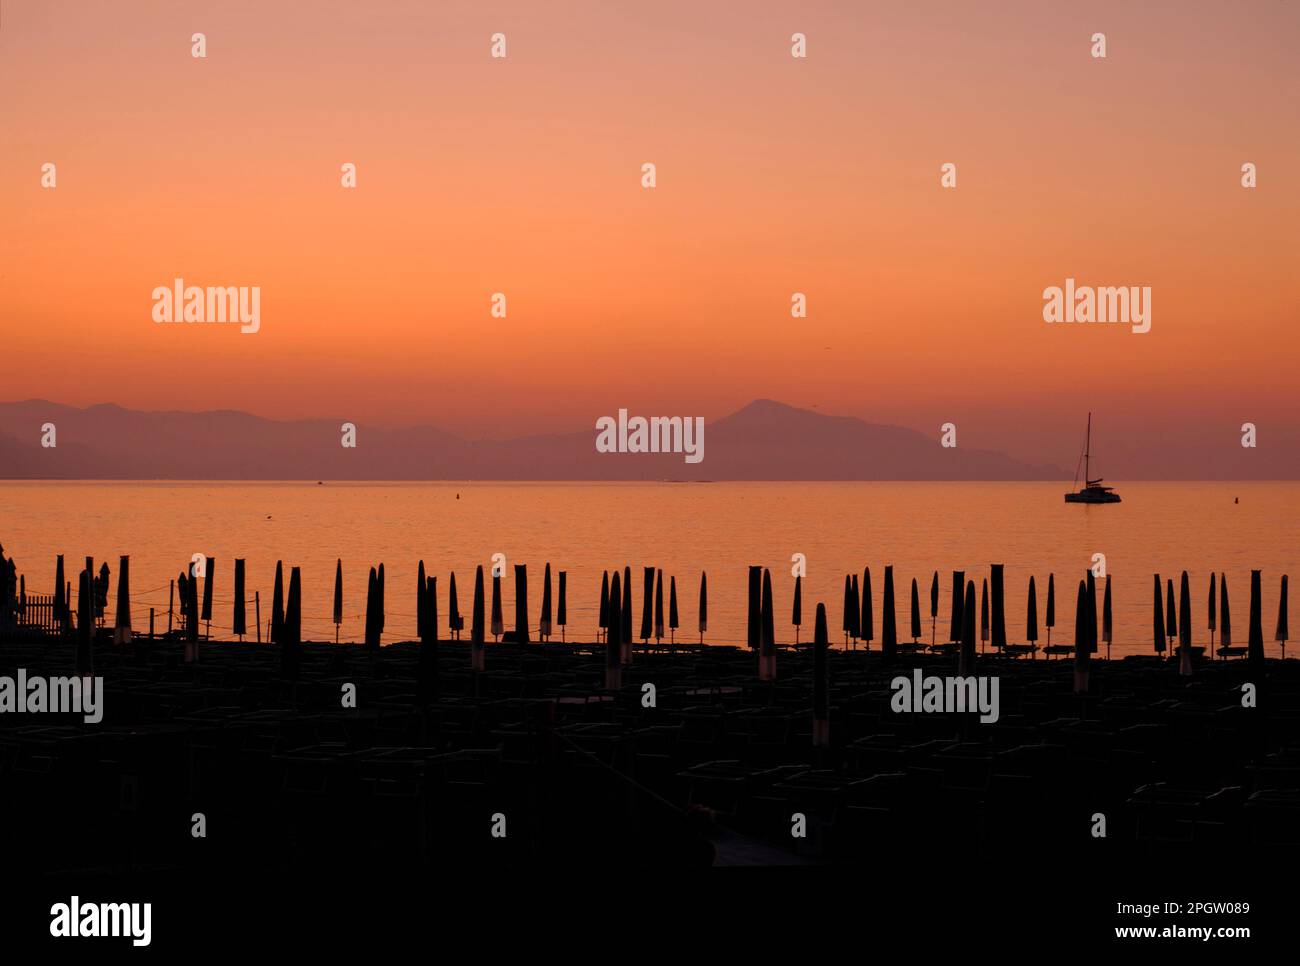 Ship sailing in the sunset sea, across mountains, and sun beds on the beach in Sestri Levante, Liguria, Italy. Summer background Stock Photo